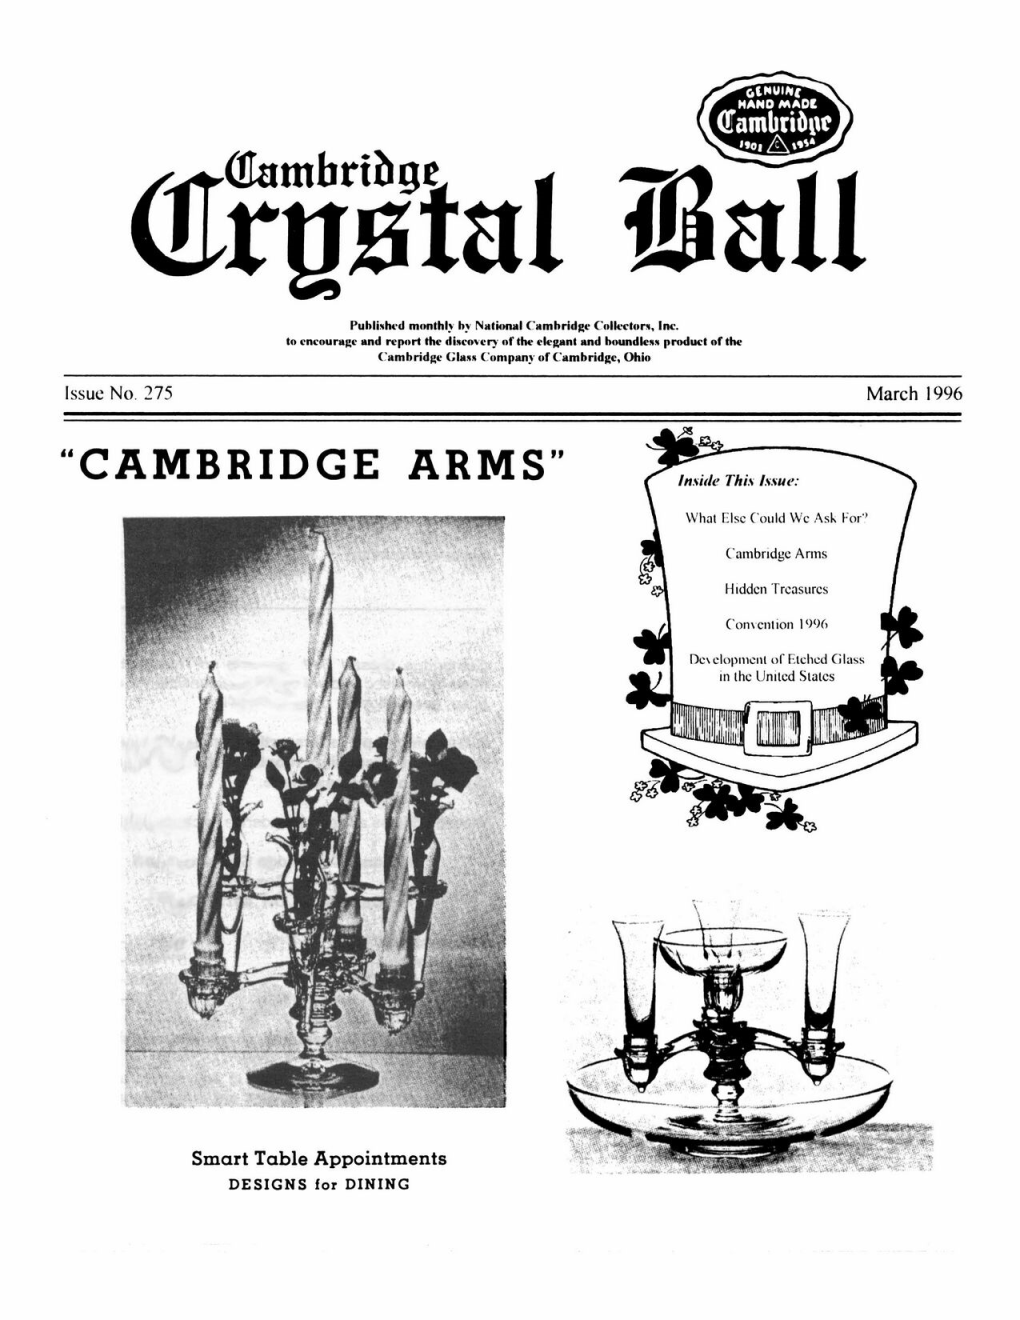 Crystal Ball Newsletter March 1996